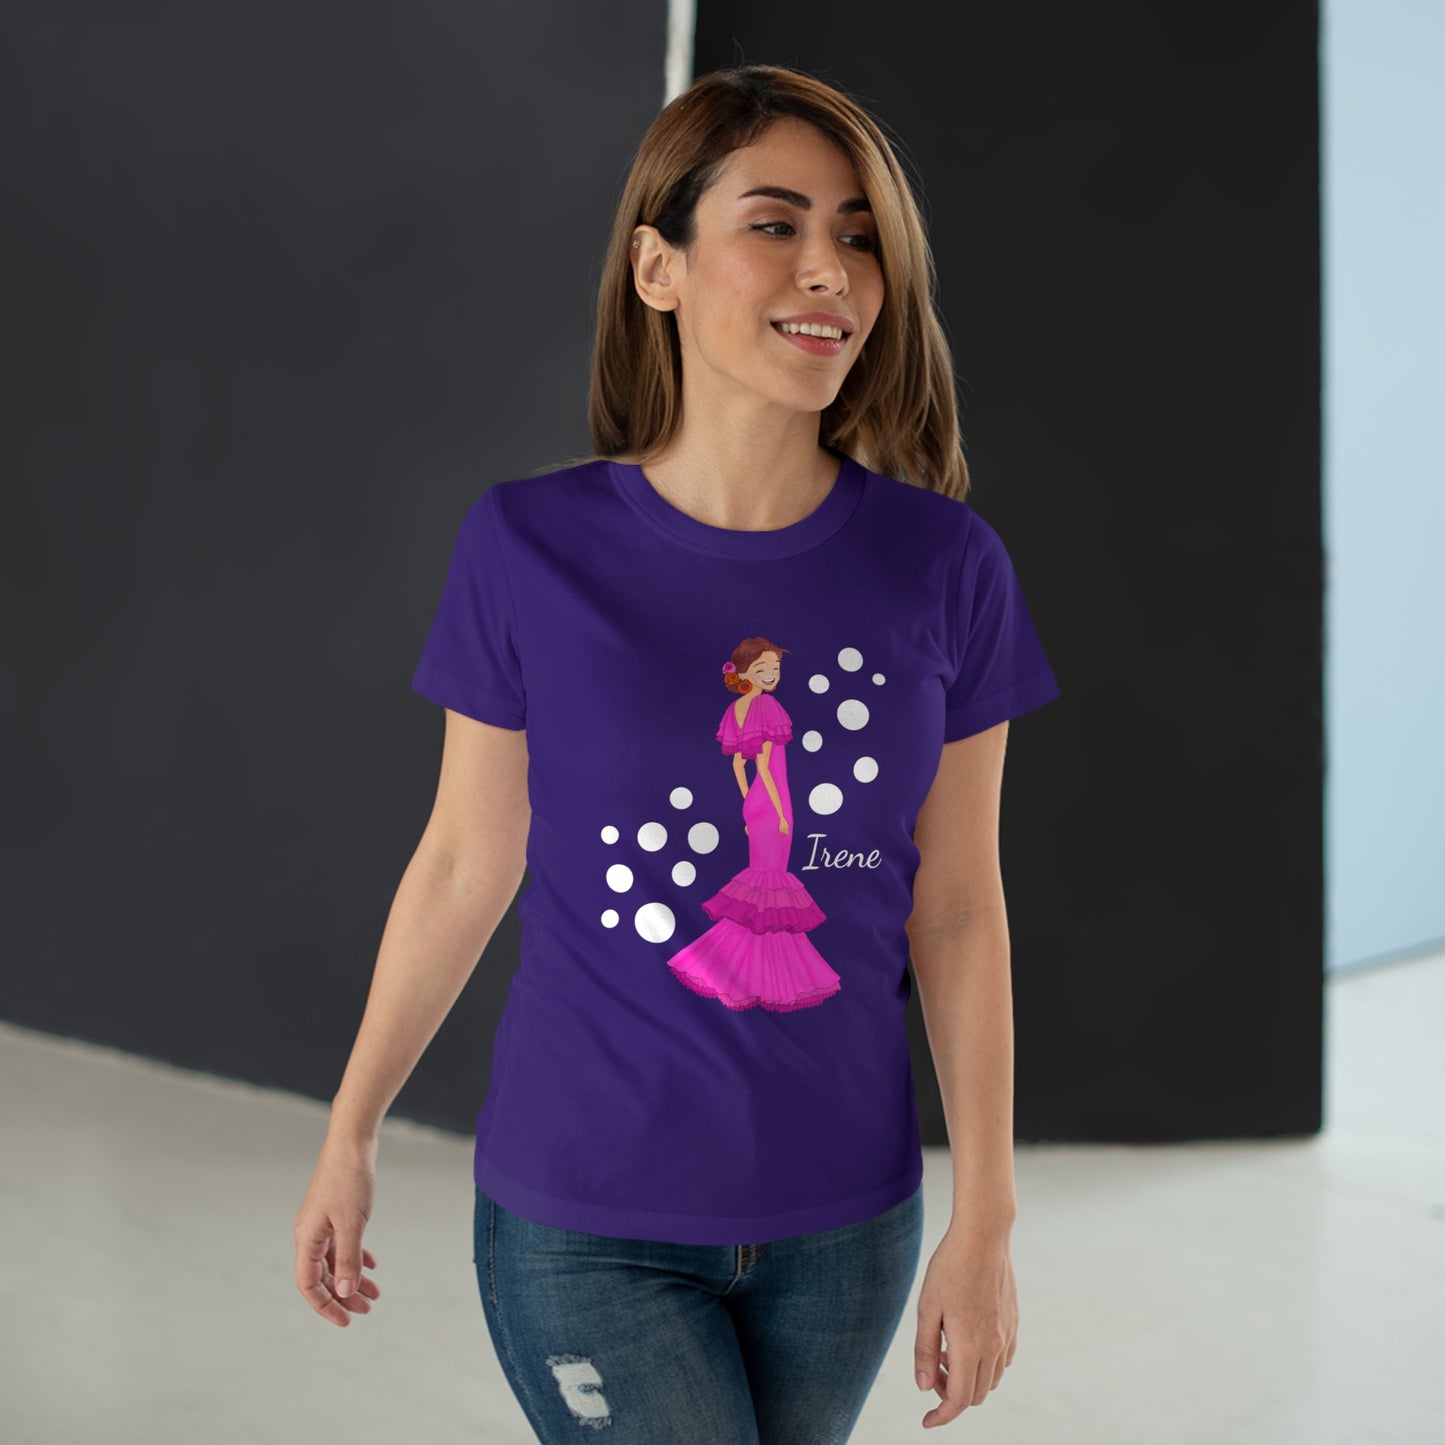 a woman wearing a purple t - shirt with a princess on it